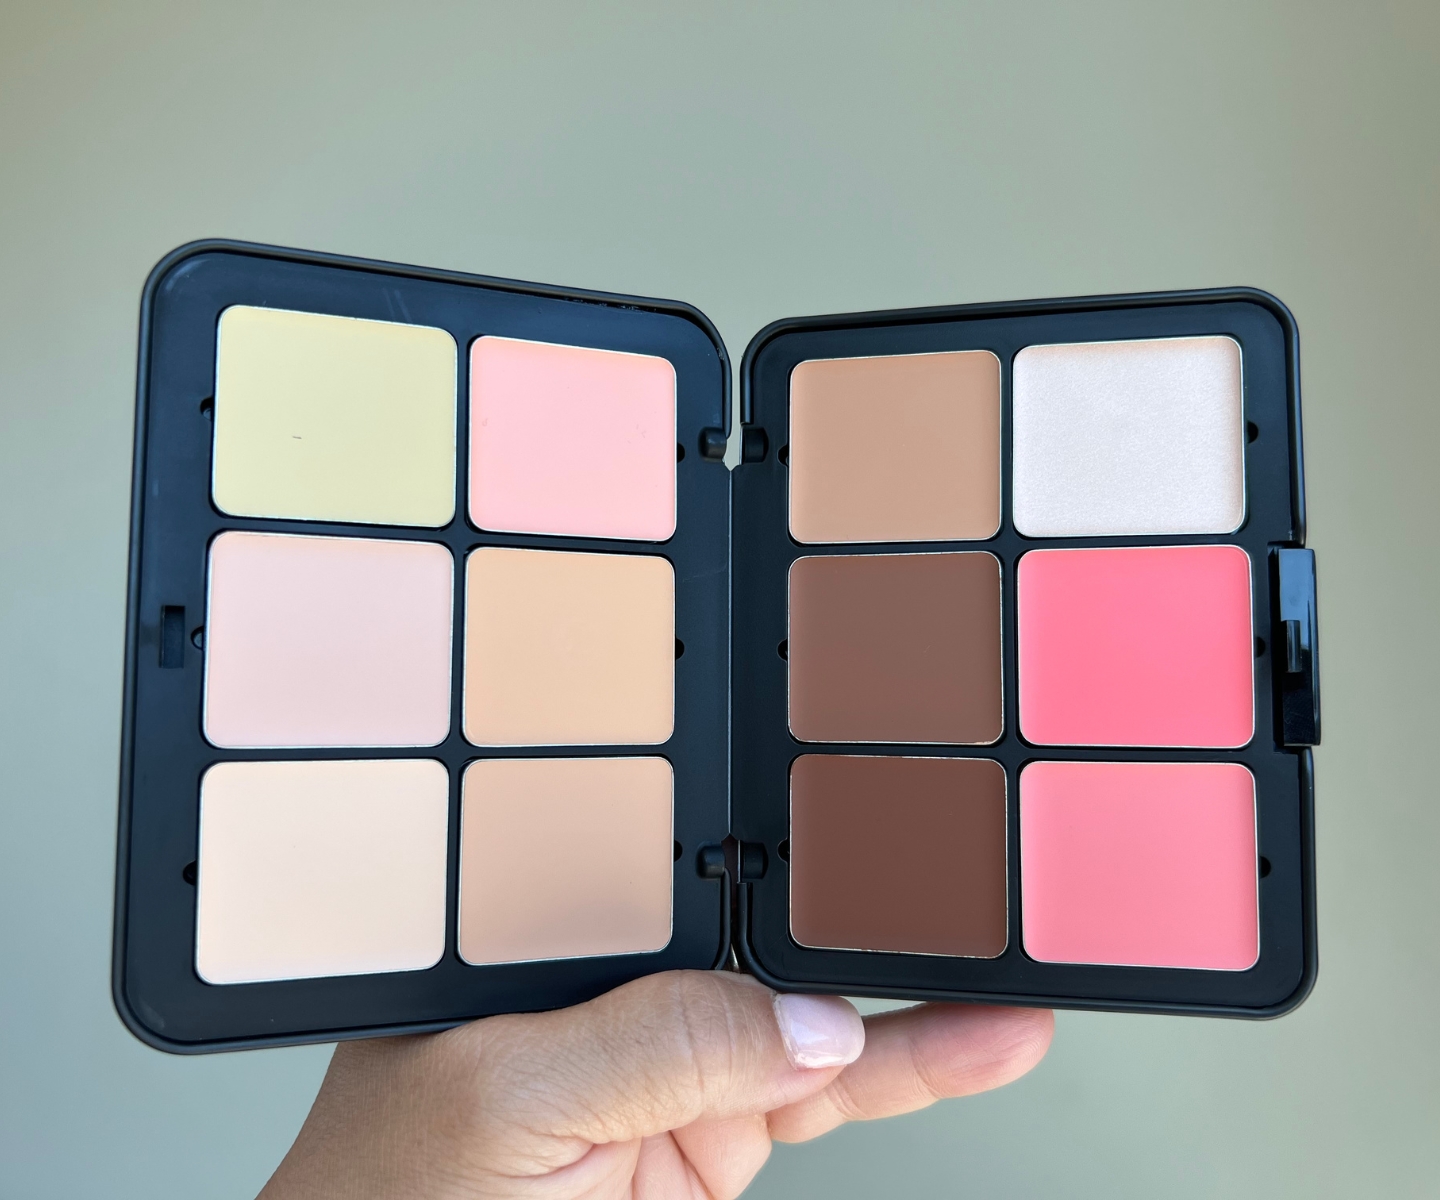 Make Up for Ever HD Skin Cream Contour and Highlight Sculpting Palette